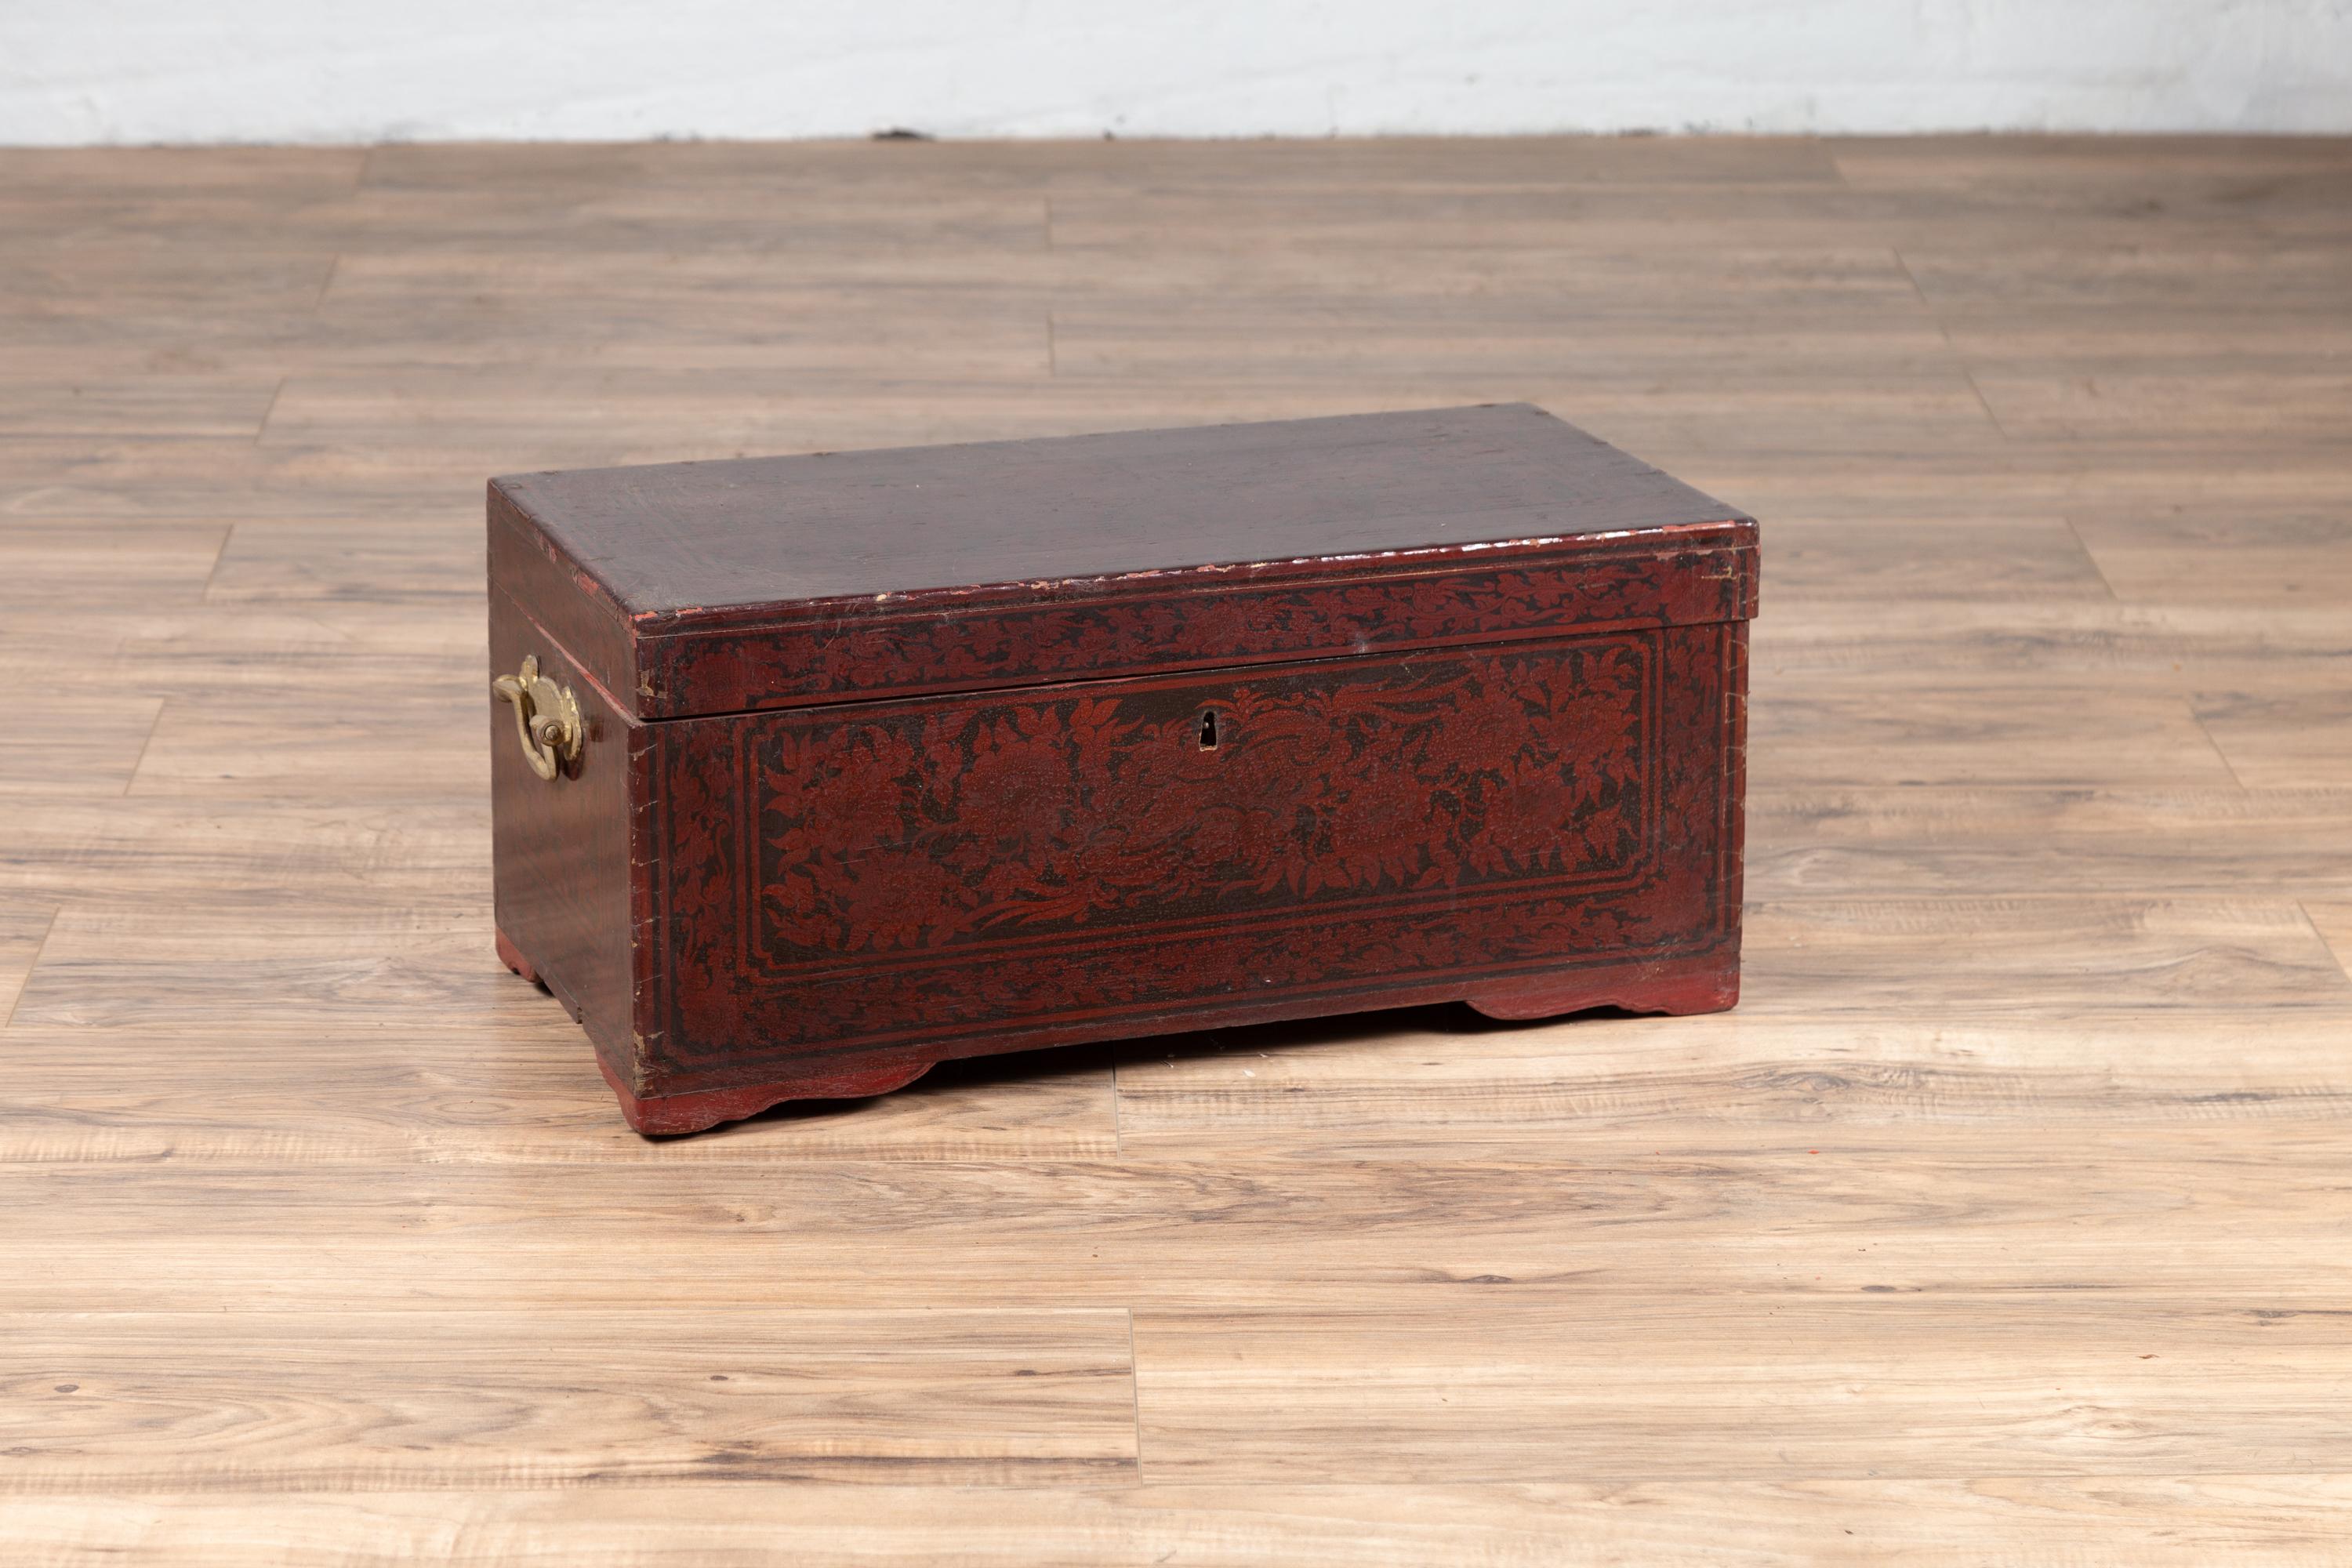 20th Century Vintage Lacquered Leather Chest with Burgundy Patina from Palembang, Sumatra